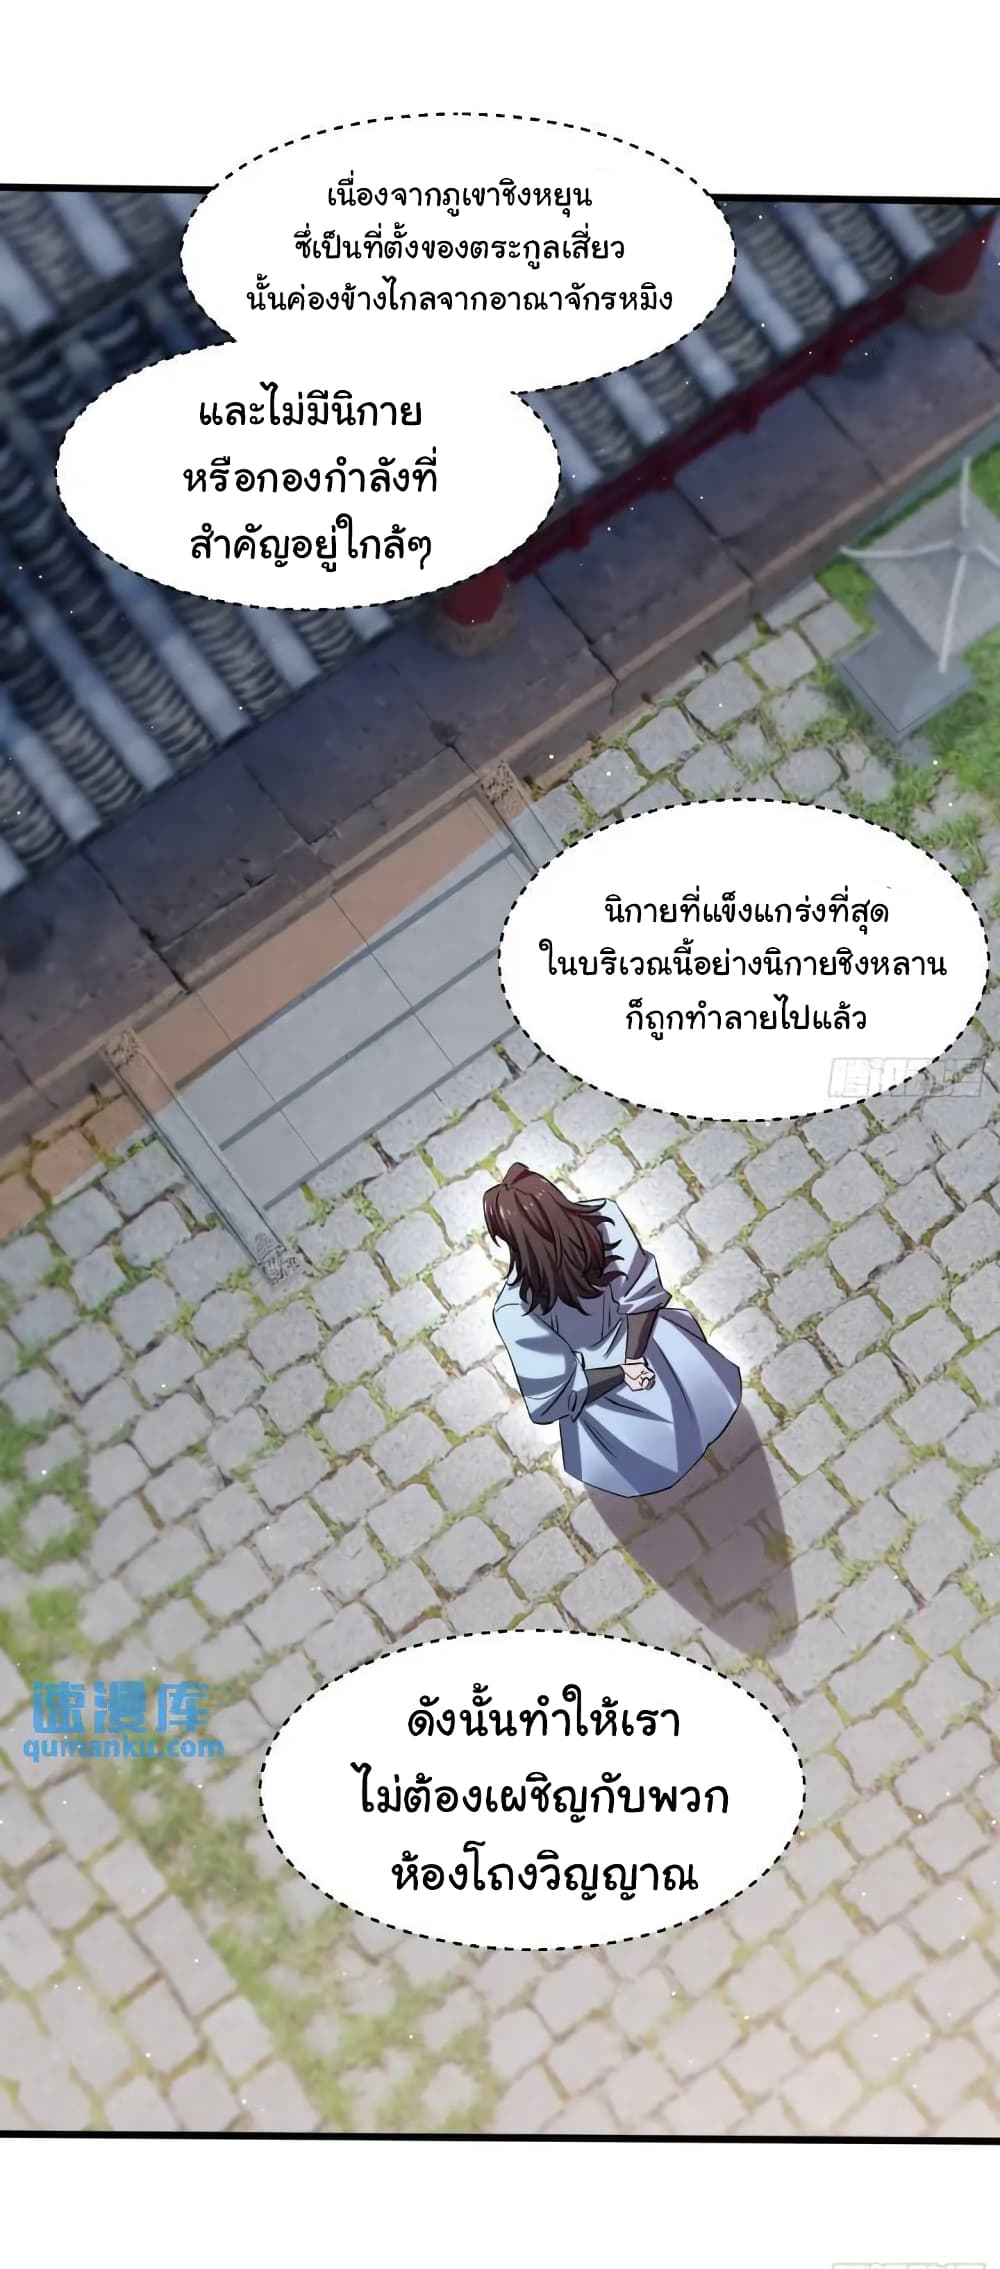 When The System Opens After The Age Of 100 ตอนที่ 17 (26)